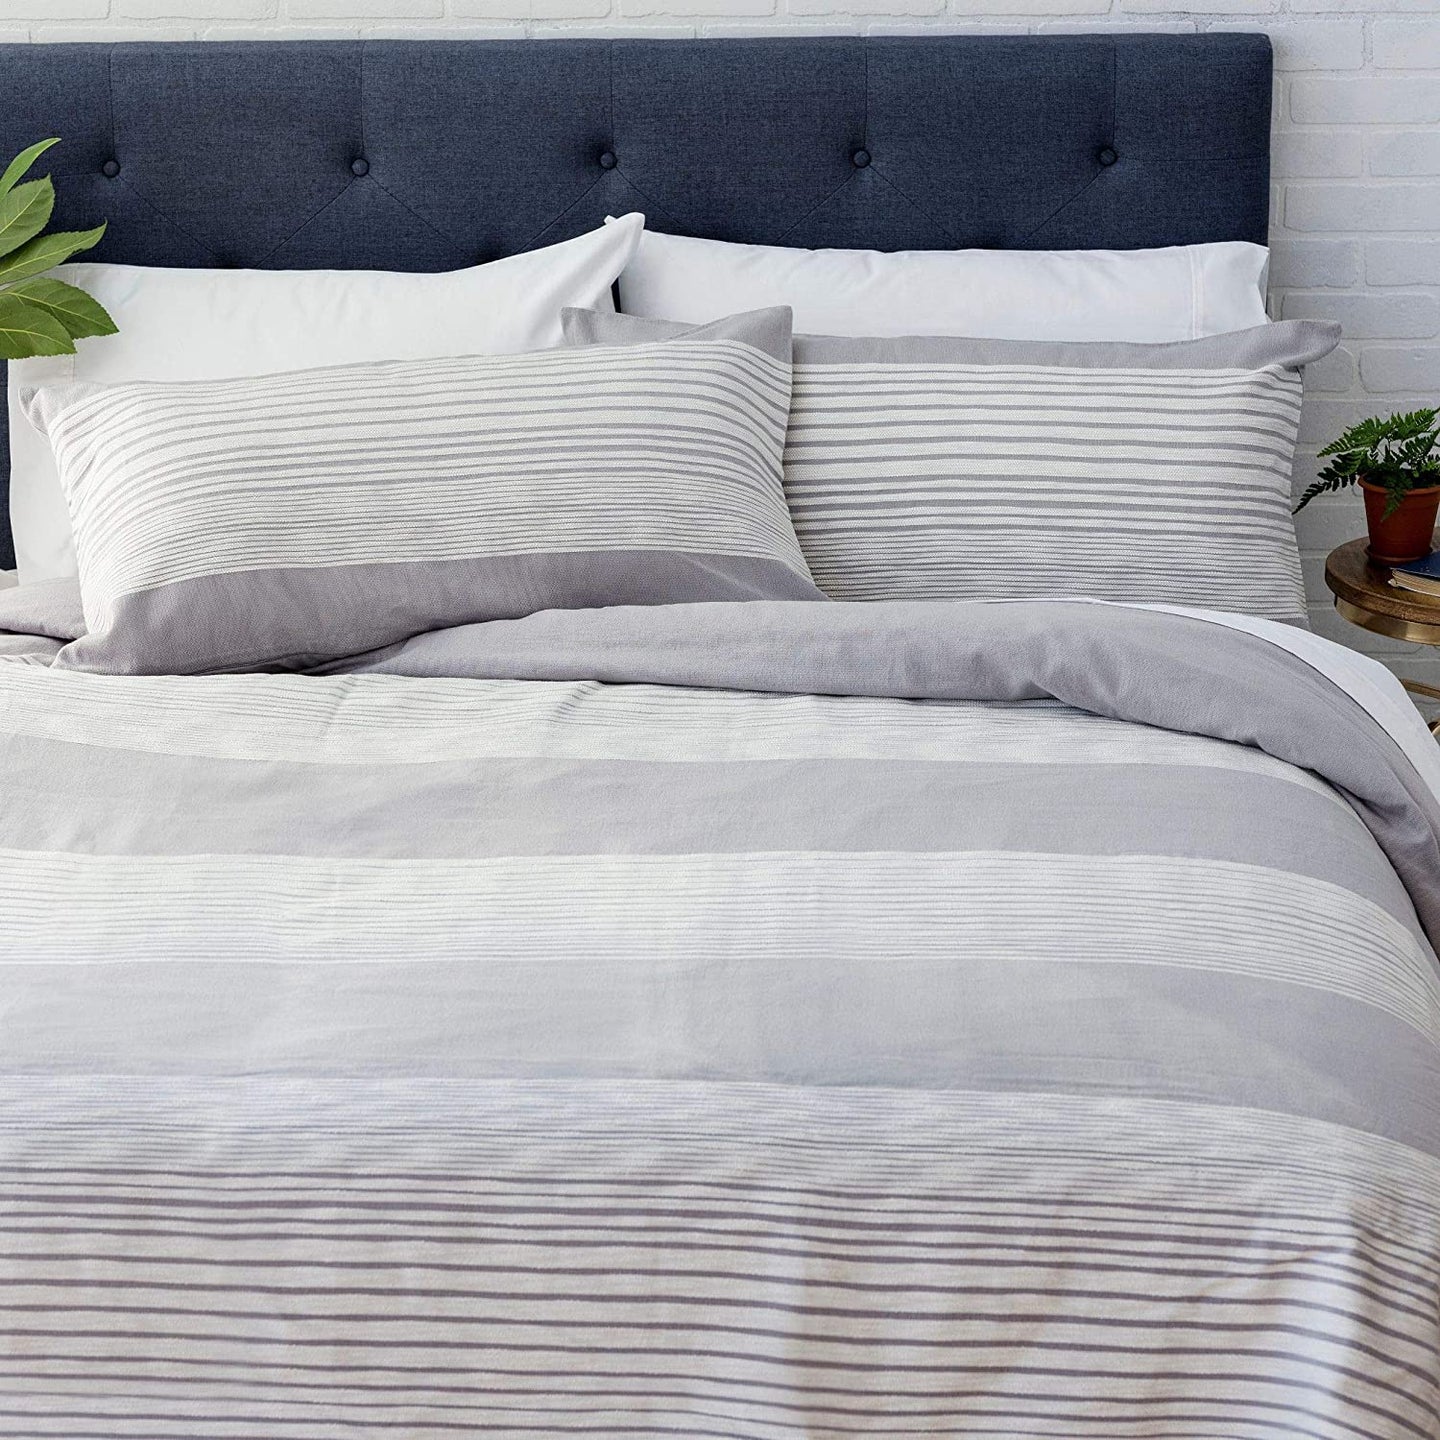 Welhome 100% Cotton Percale Crosby Stripe Comforter Set - Full/Queen - 88